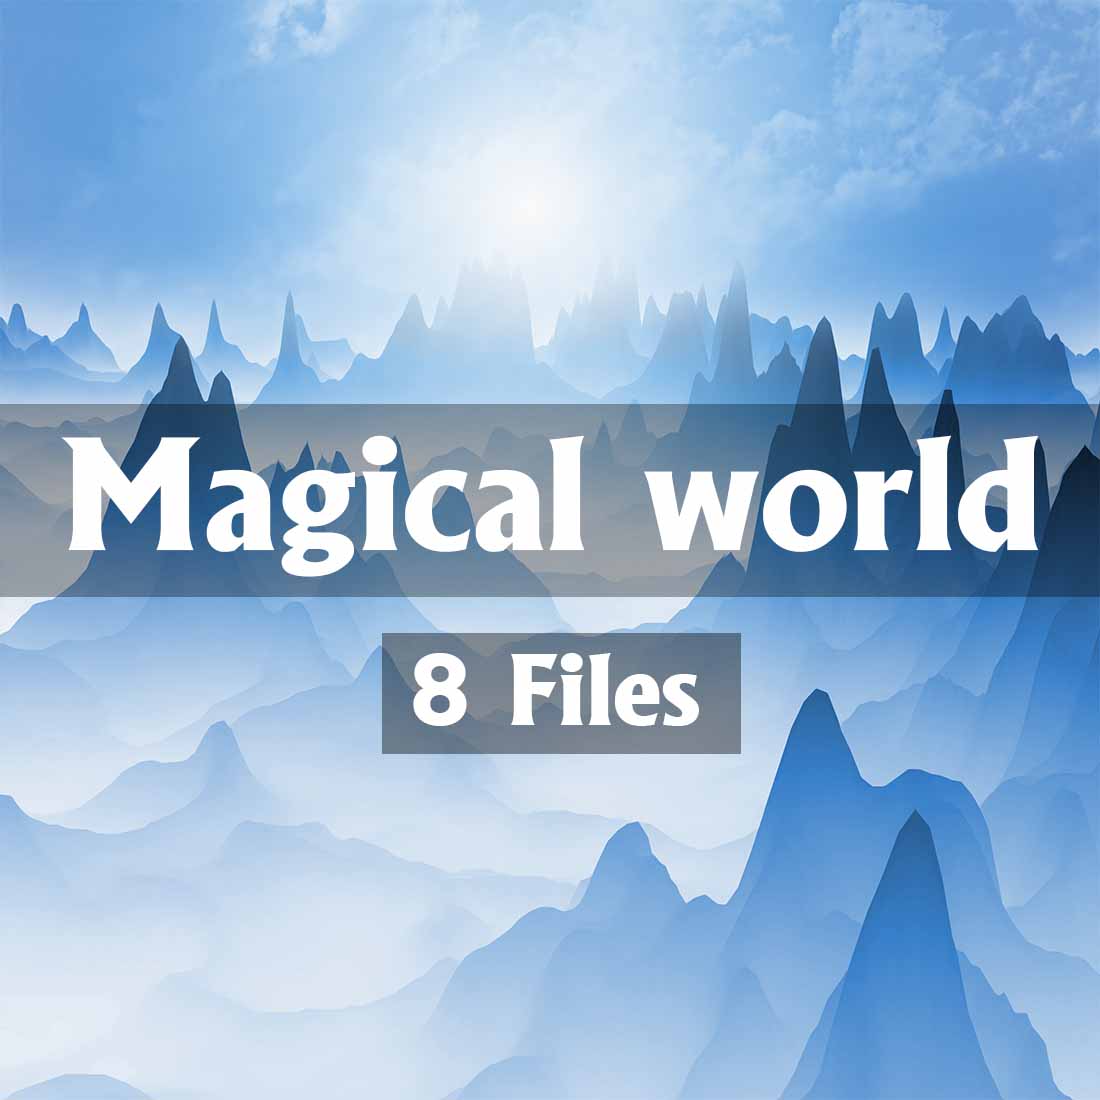 Magical world cover image.